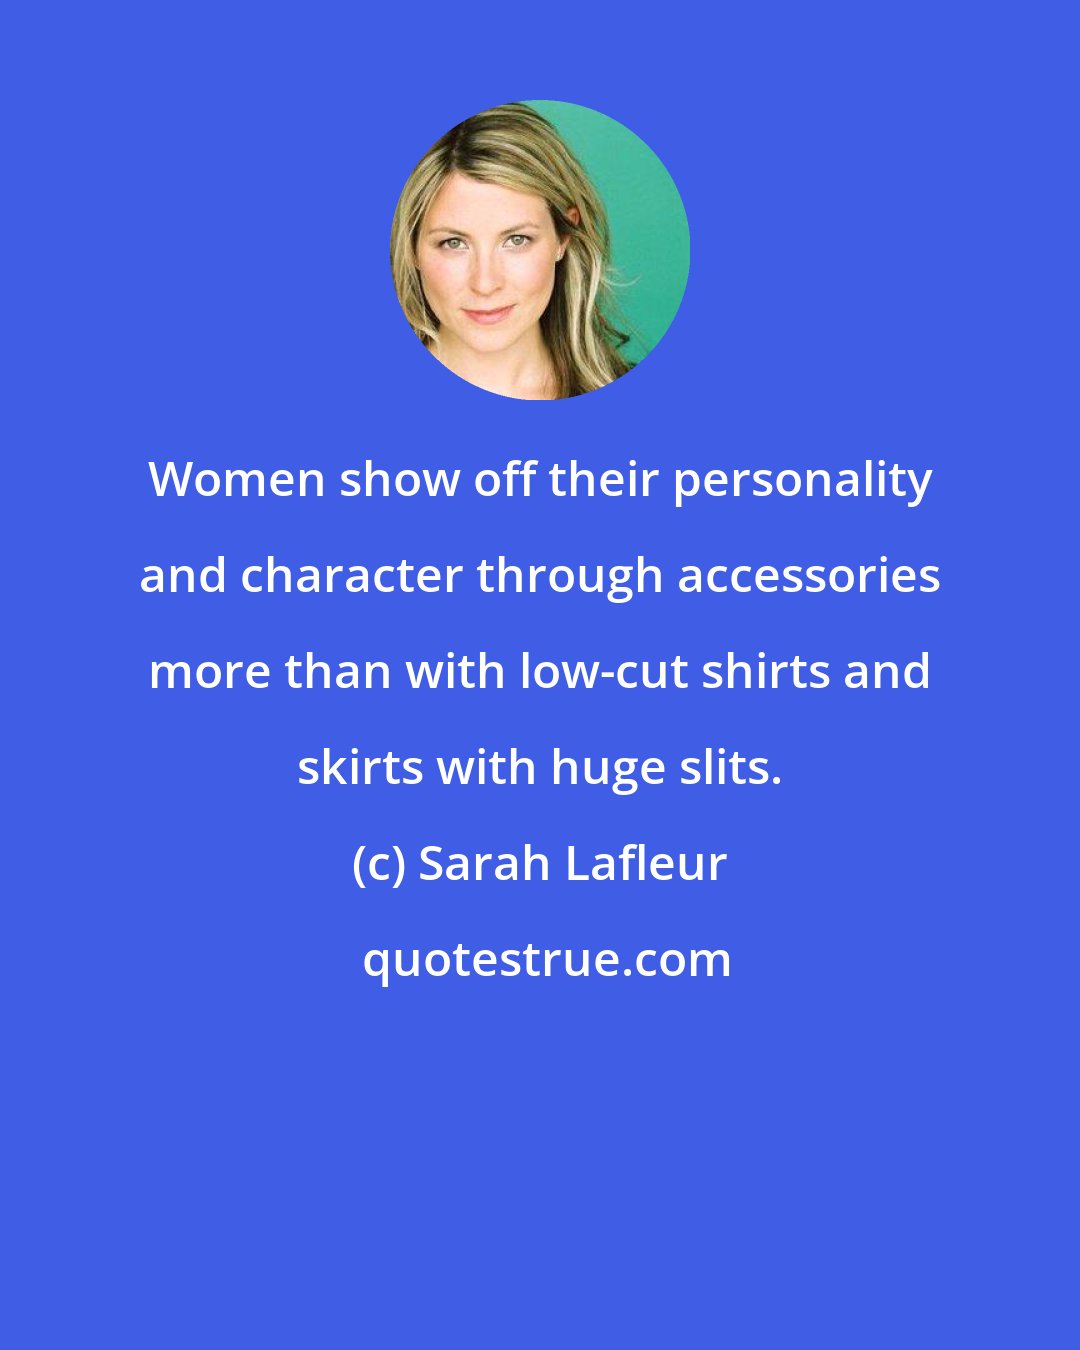 Sarah Lafleur: Women show off their personality and character through accessories more than with low-cut shirts and skirts with huge slits.